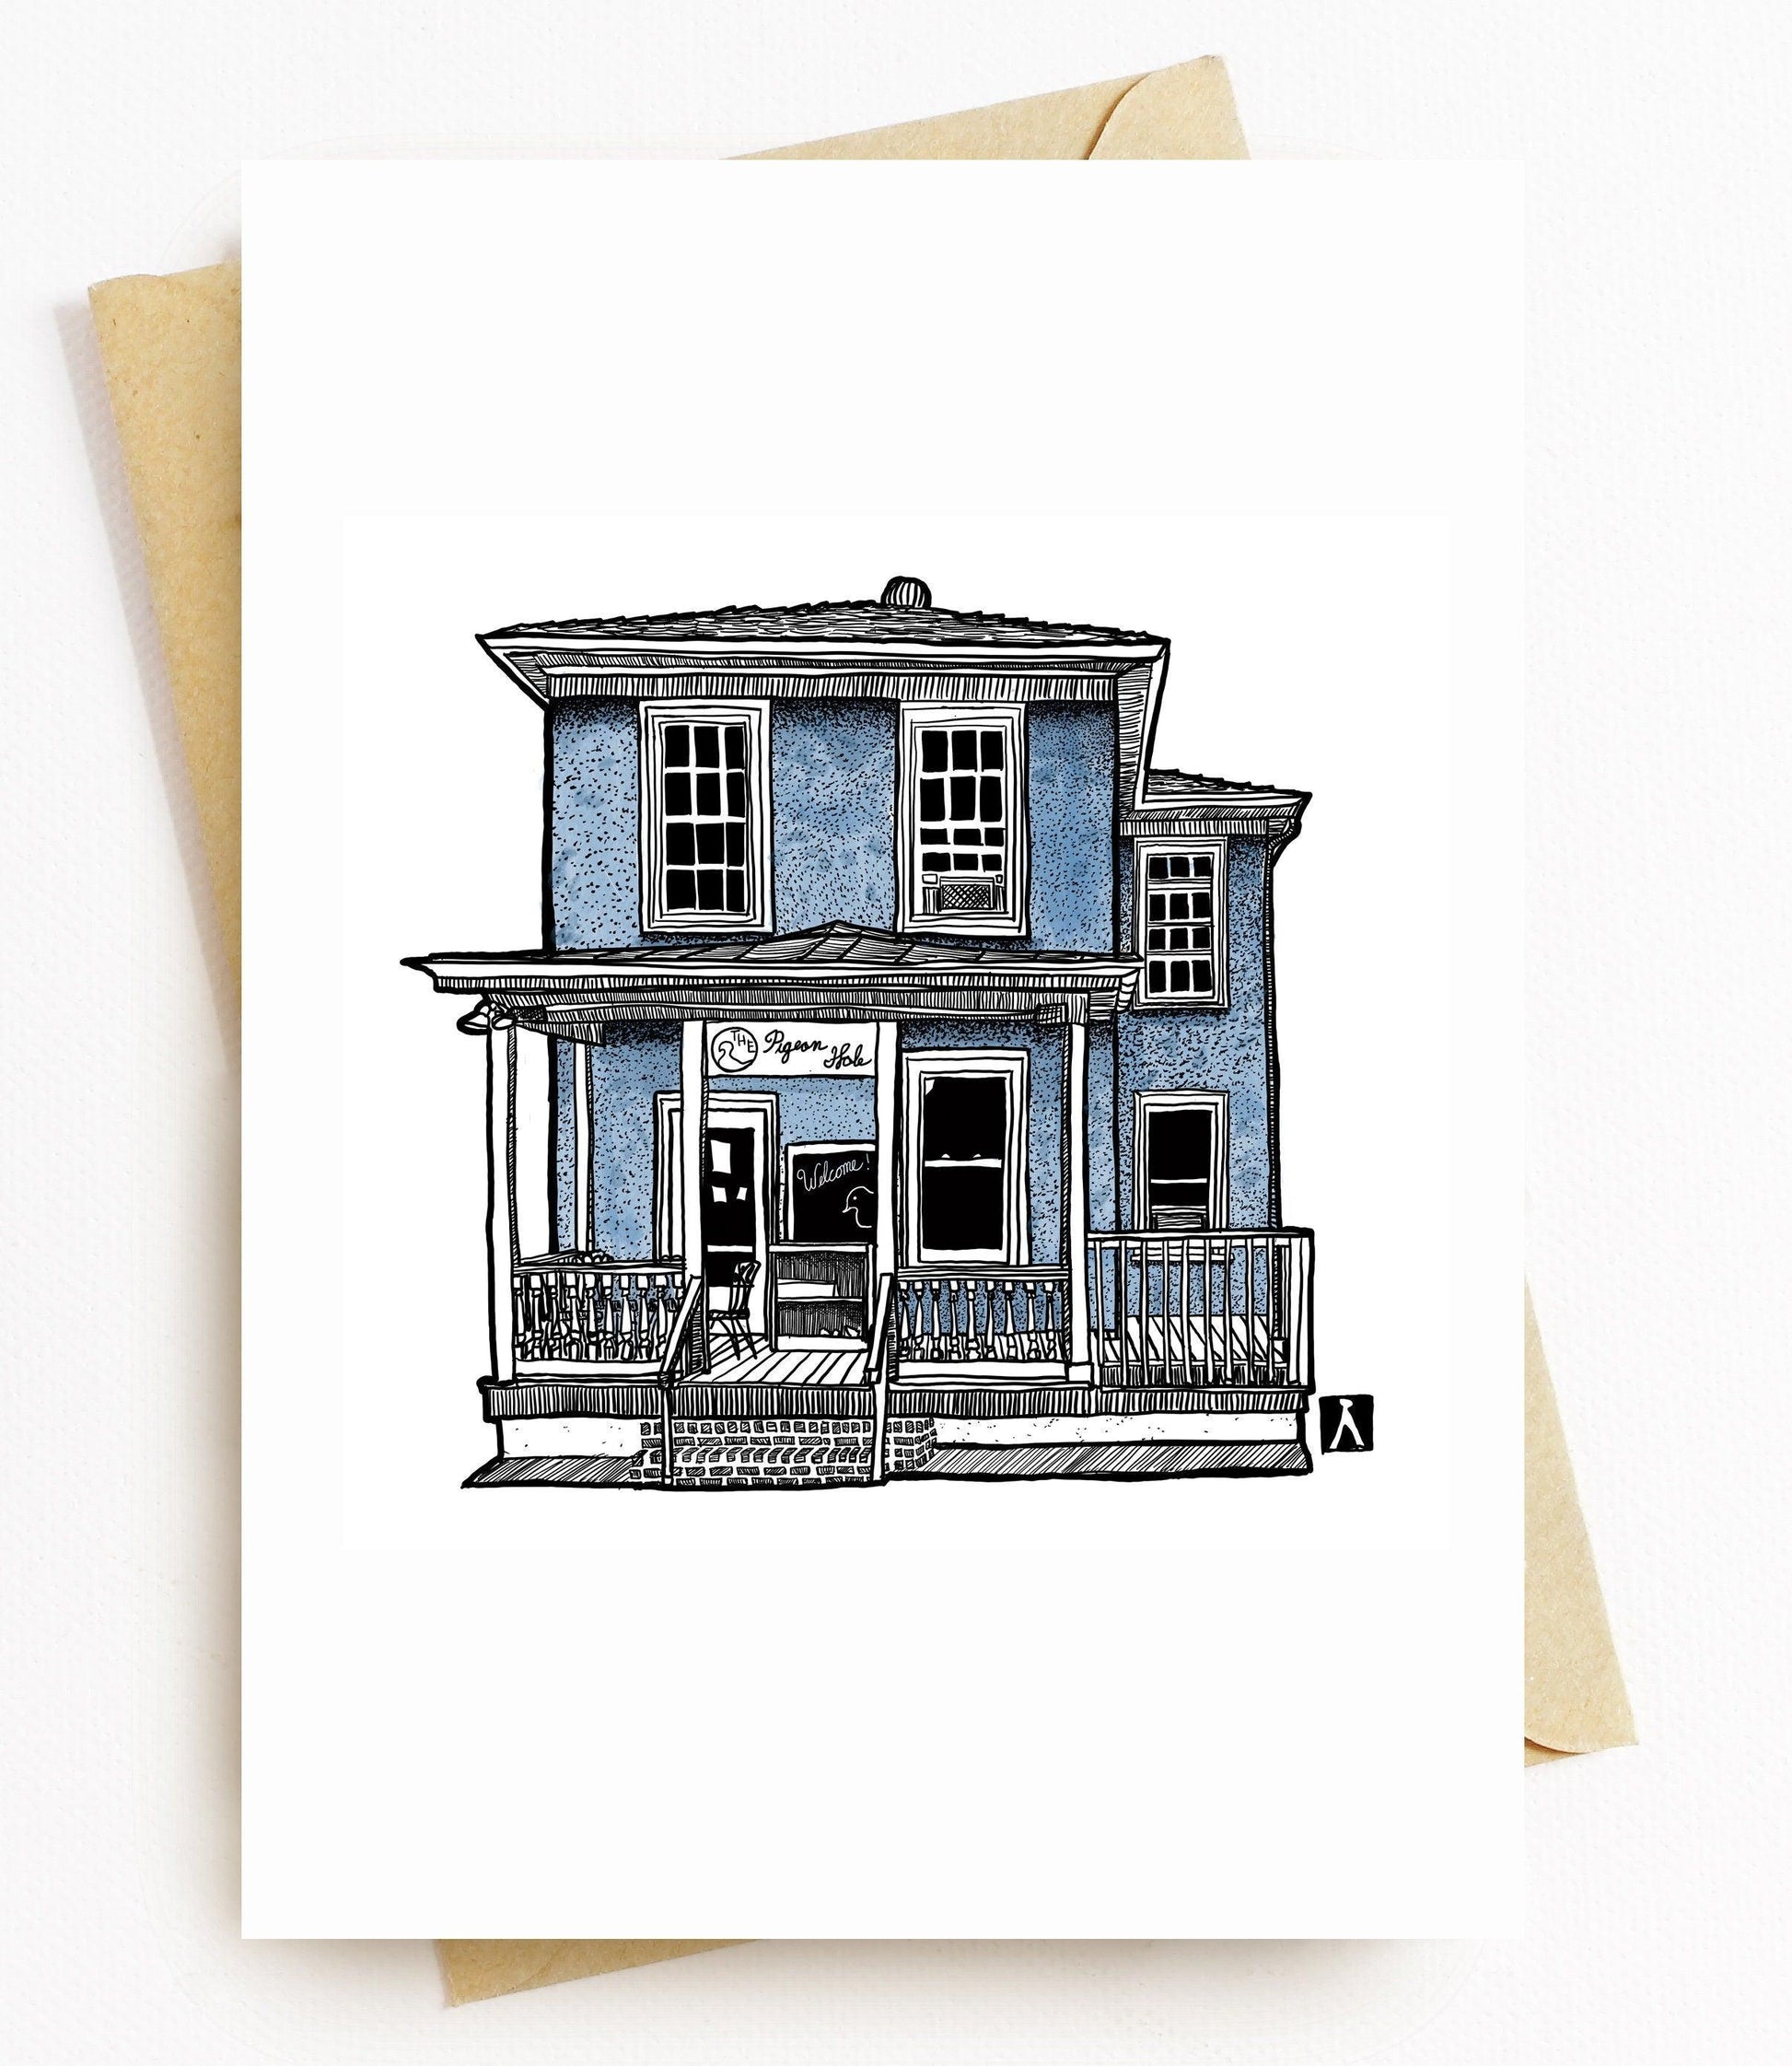 BellavanceInk: Greeting Card With The Pigeon Hole Coffee Shop In Charlottesville Virginia 5 x 7 Inches - BellavanceInk